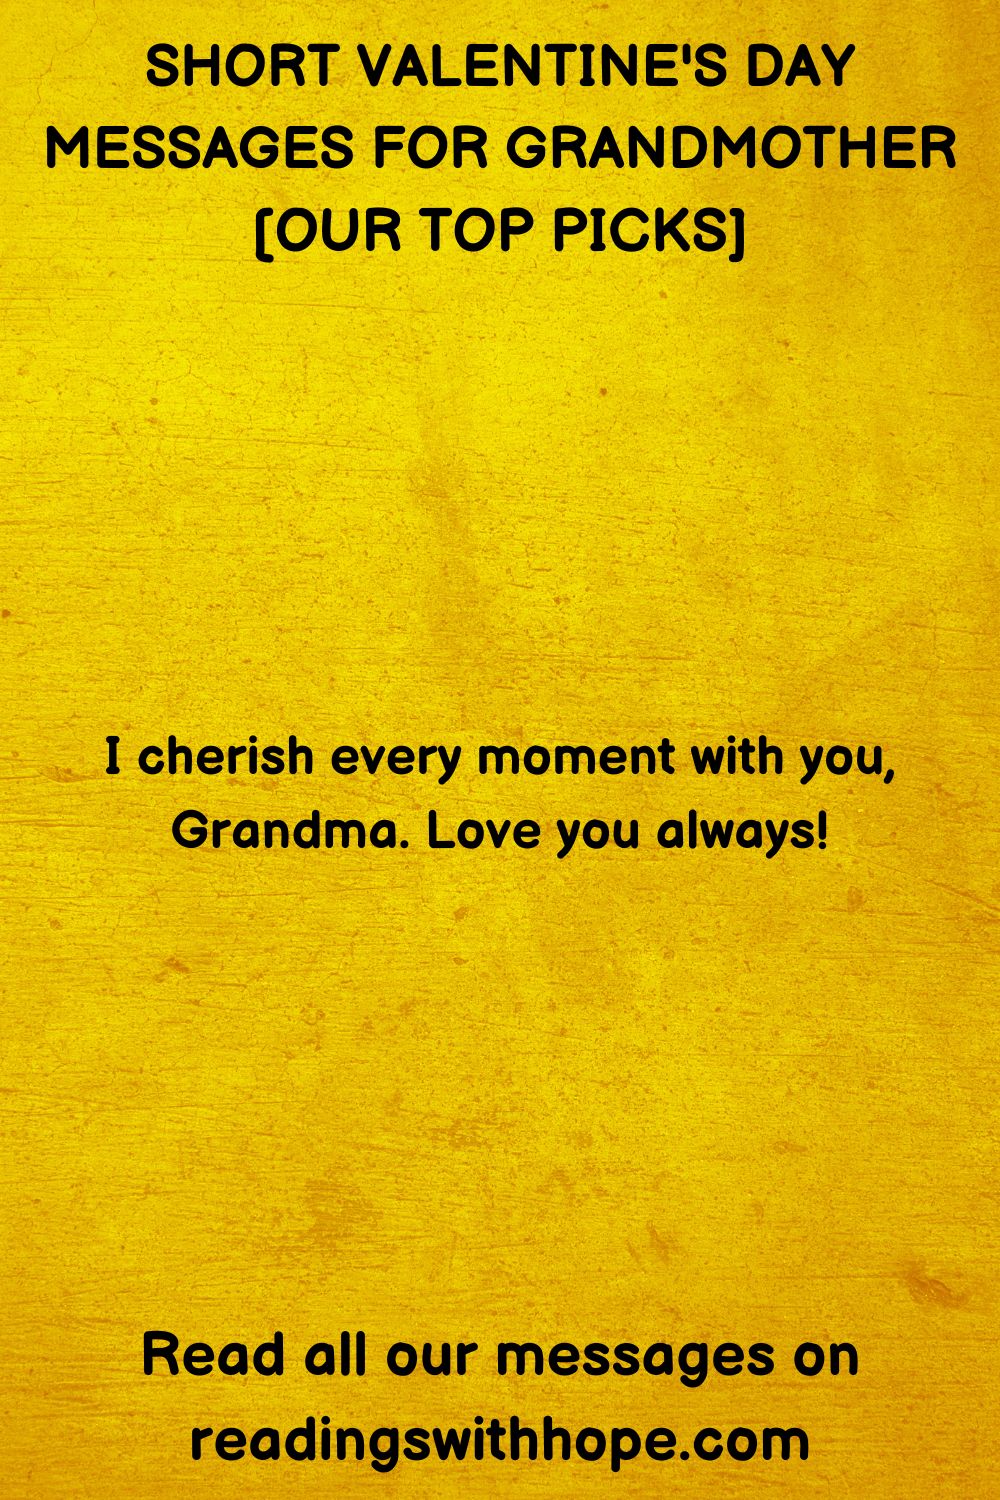 Short Valentine's Day Messages for Grandmother